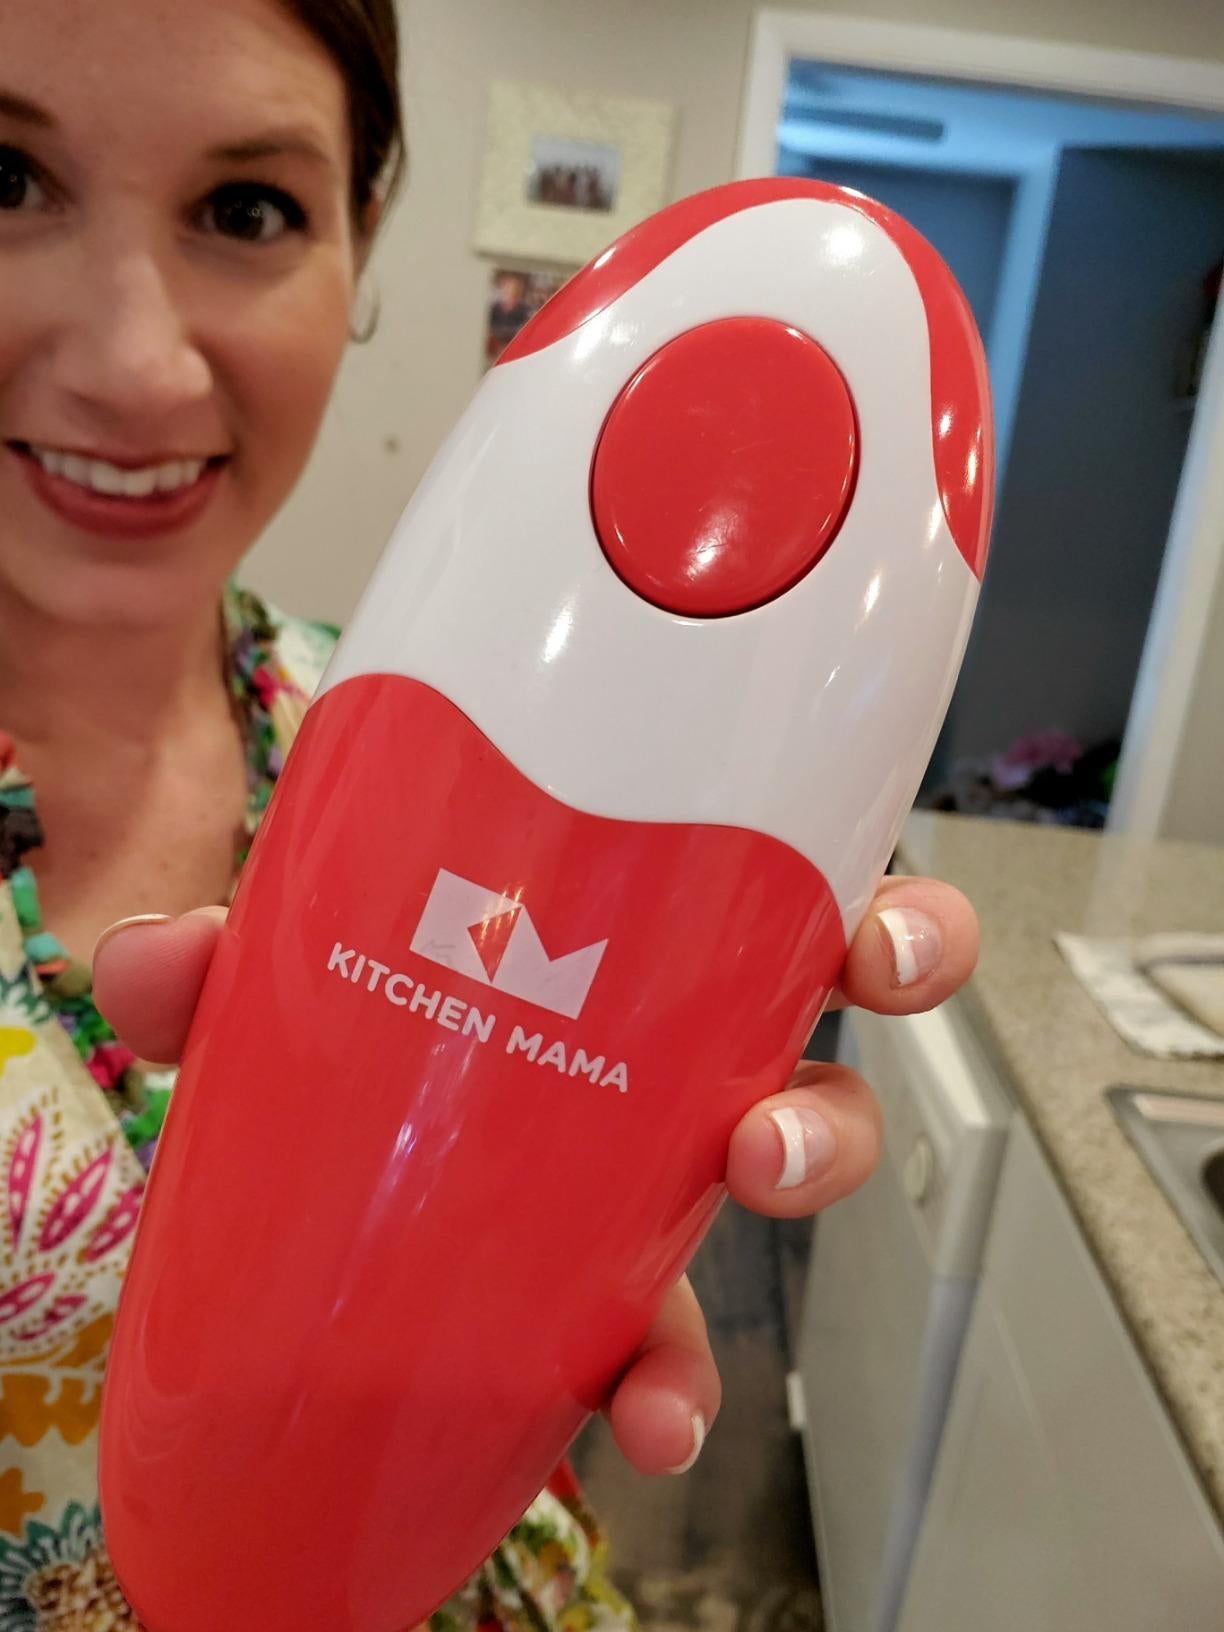 Kitchen Mama Electric Can Opener Review - A Lifesaver Can Opener